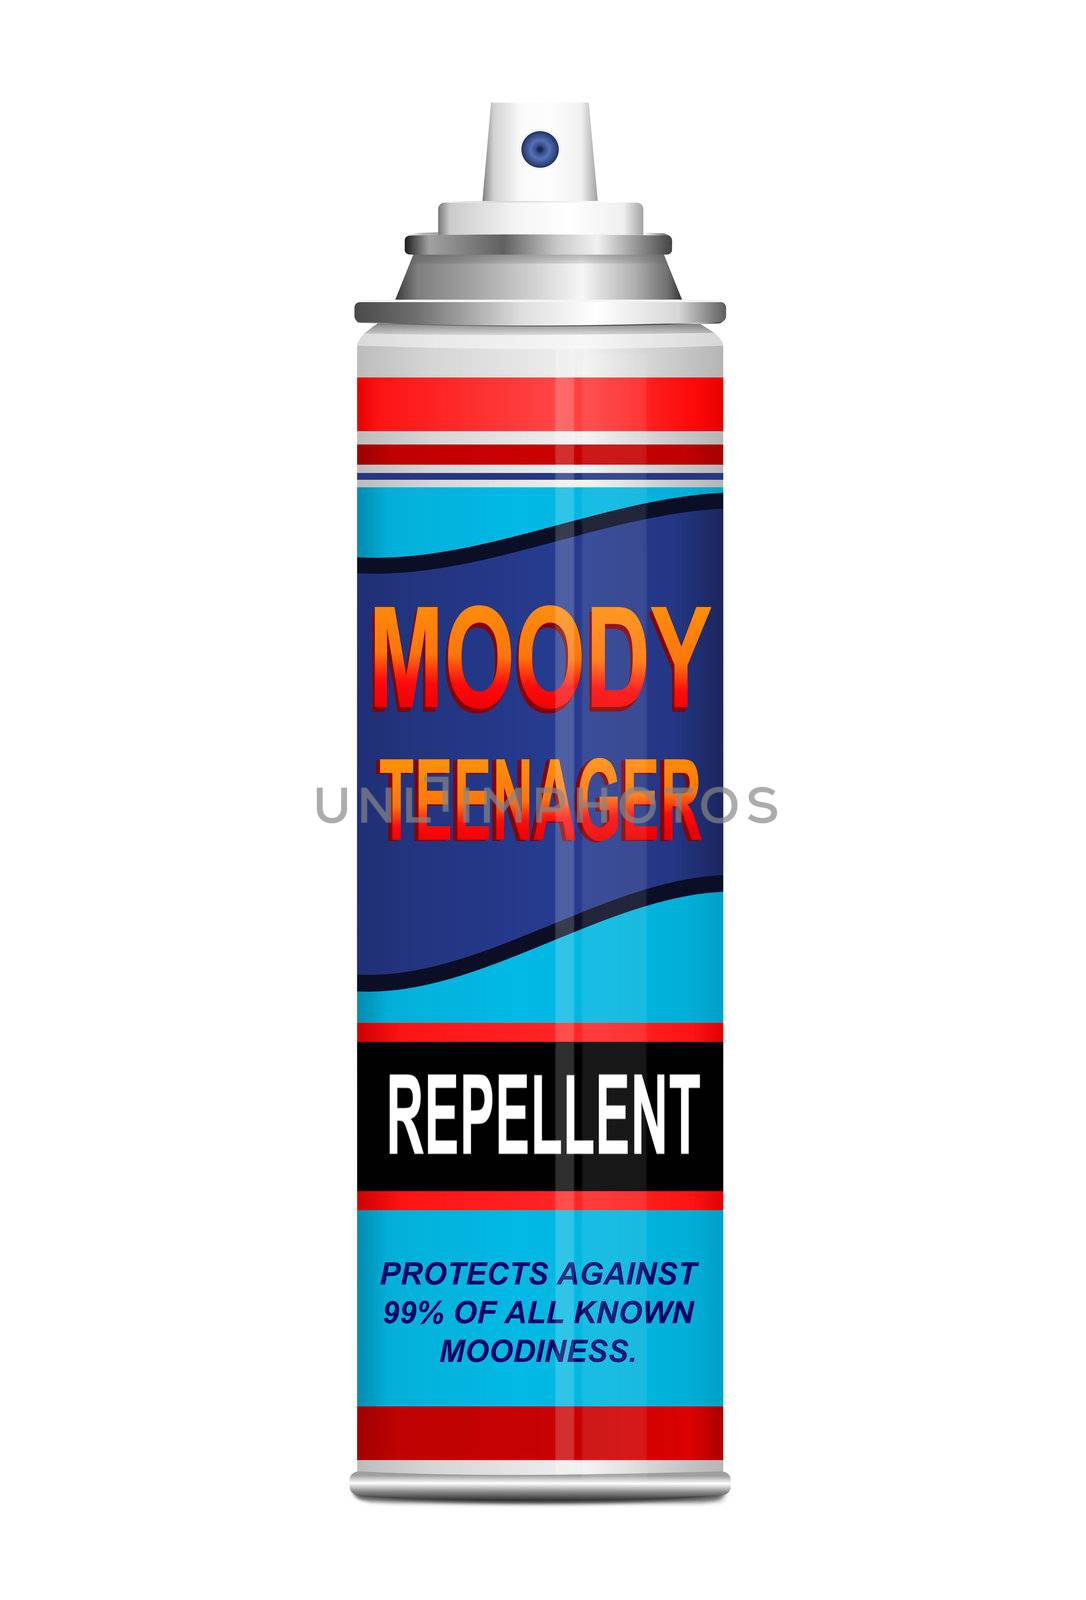 Illustration depicting a single aerosol spray can with the words 'moody teenager repellent'. White background.